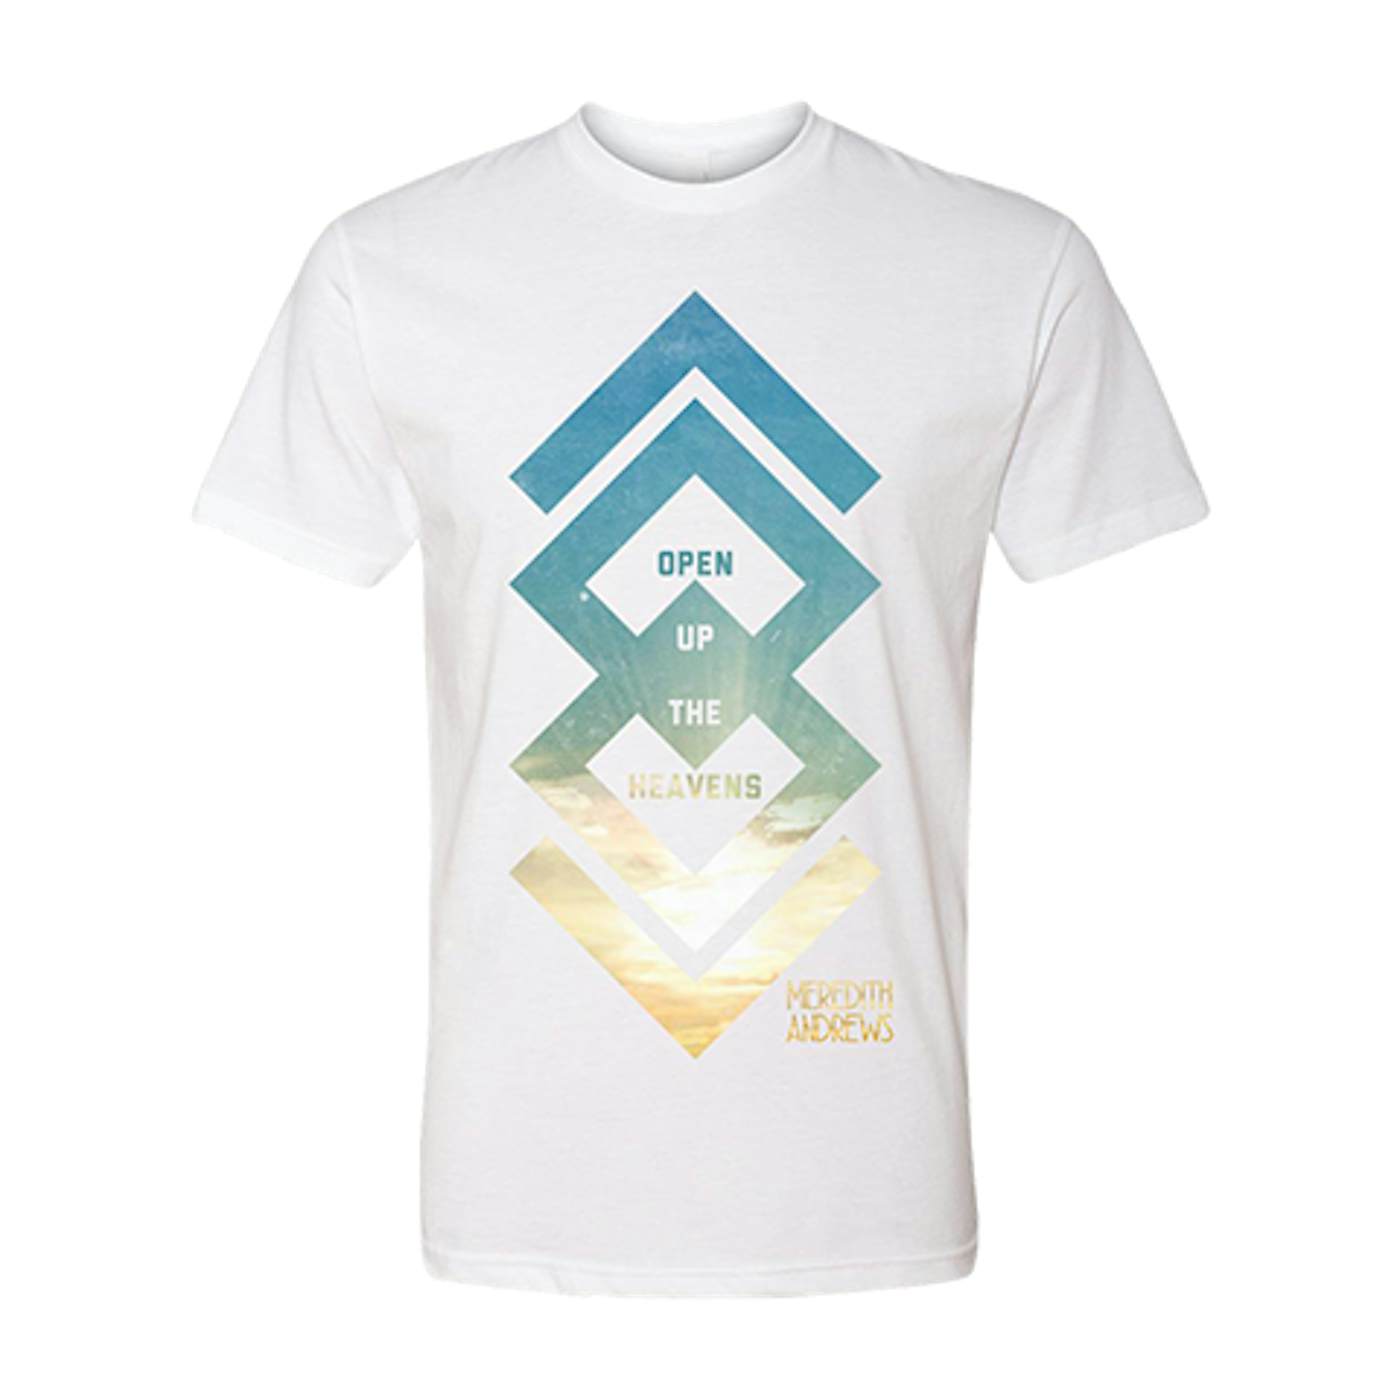 Meredith Andrews Open Up the Heavens White Arrow T-Shirt